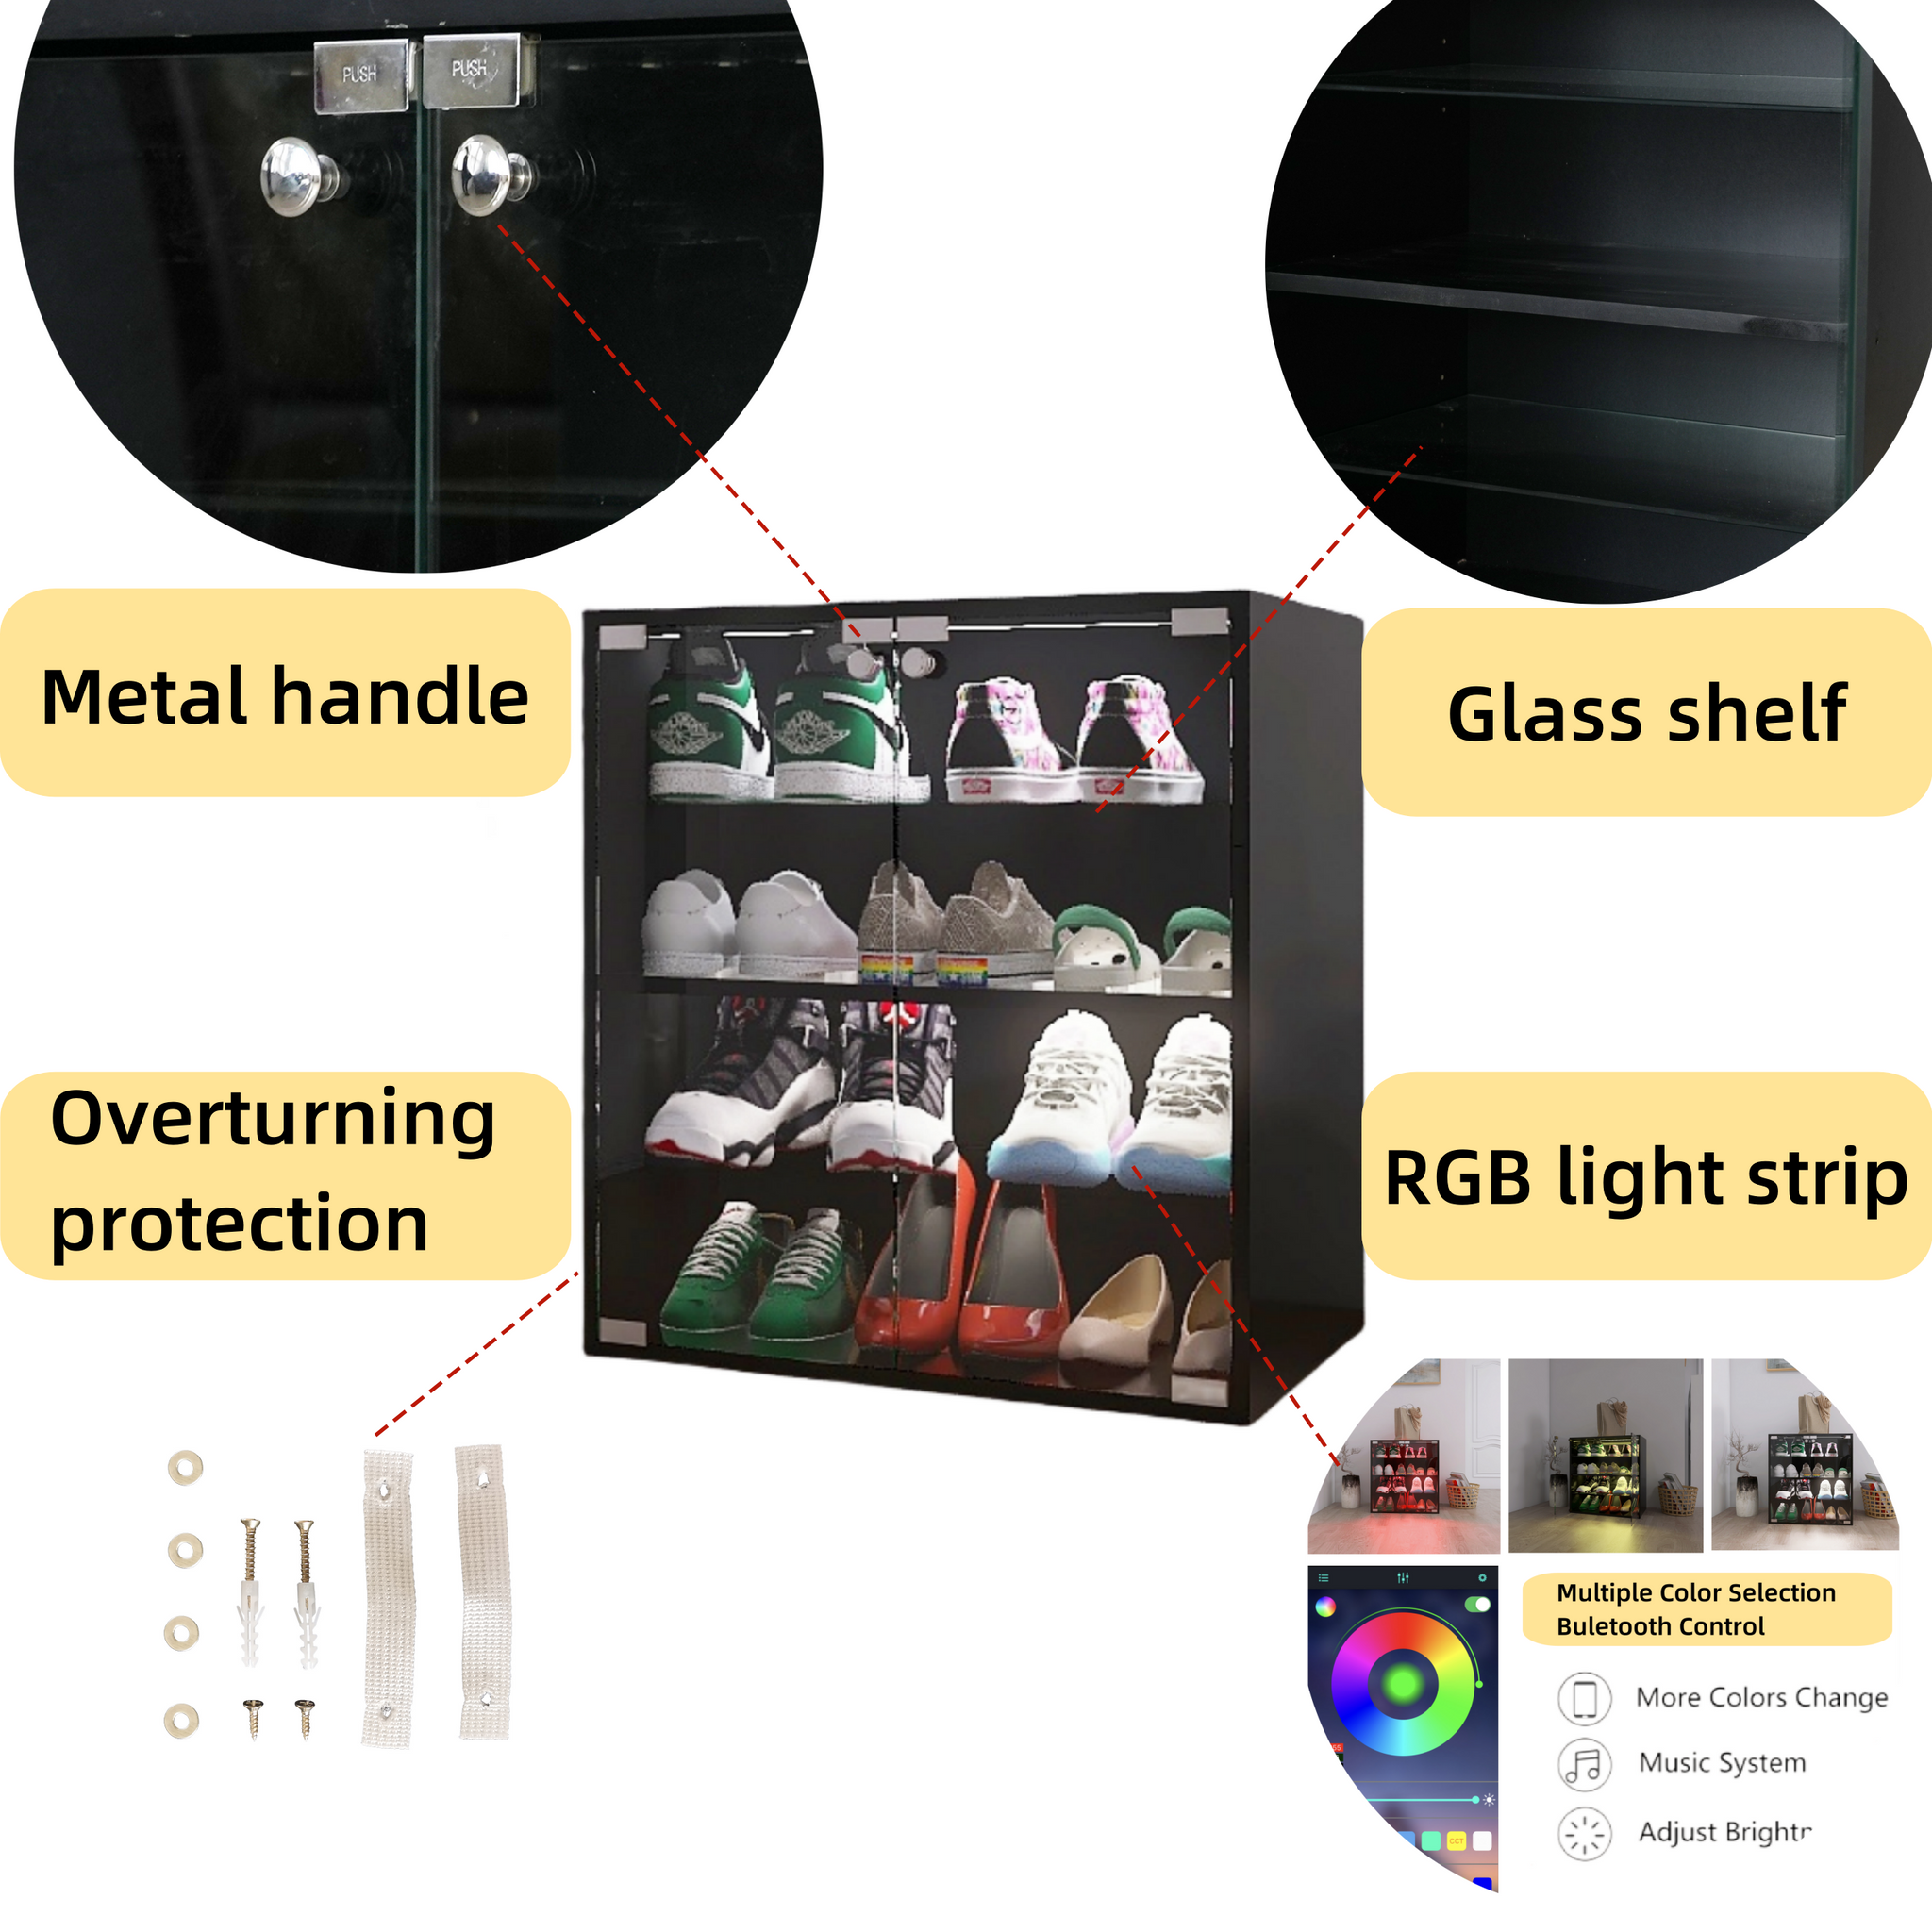 4 Layers Black Shoe Cabinet with Glass Door and